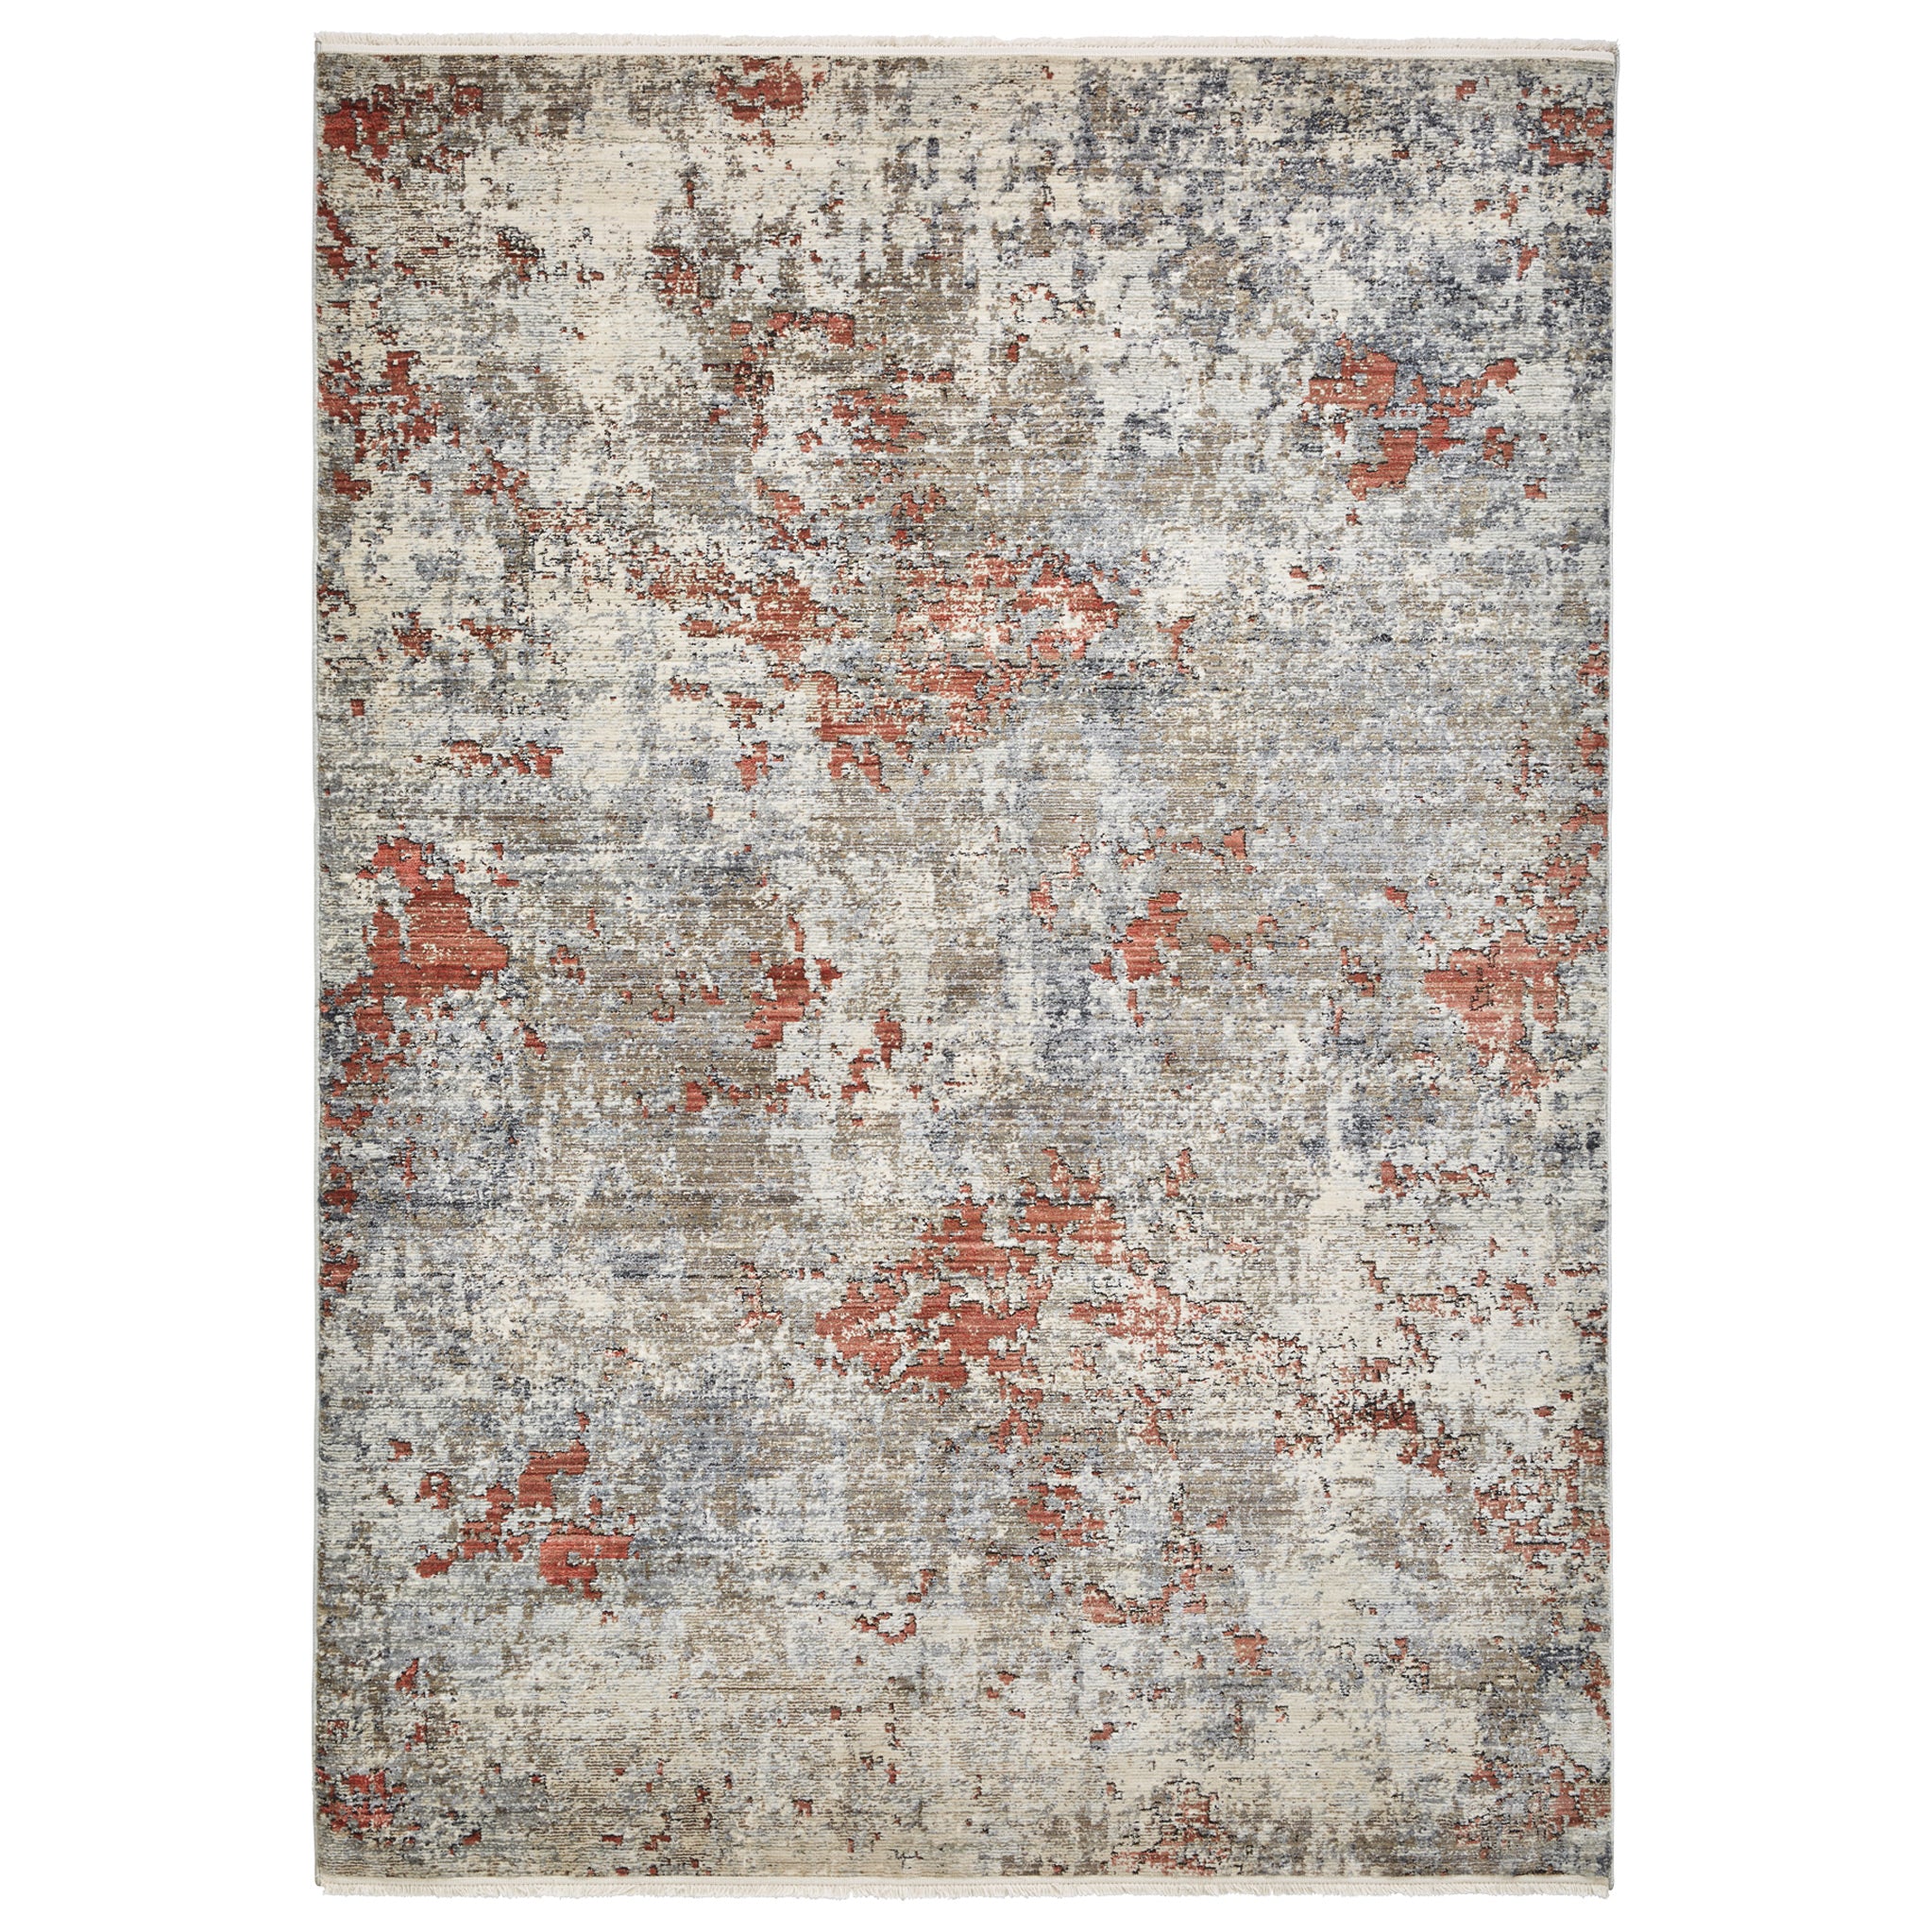 Thea Distressed Terracotta Antique Rectangular Rug For Living Room Or Bedroom